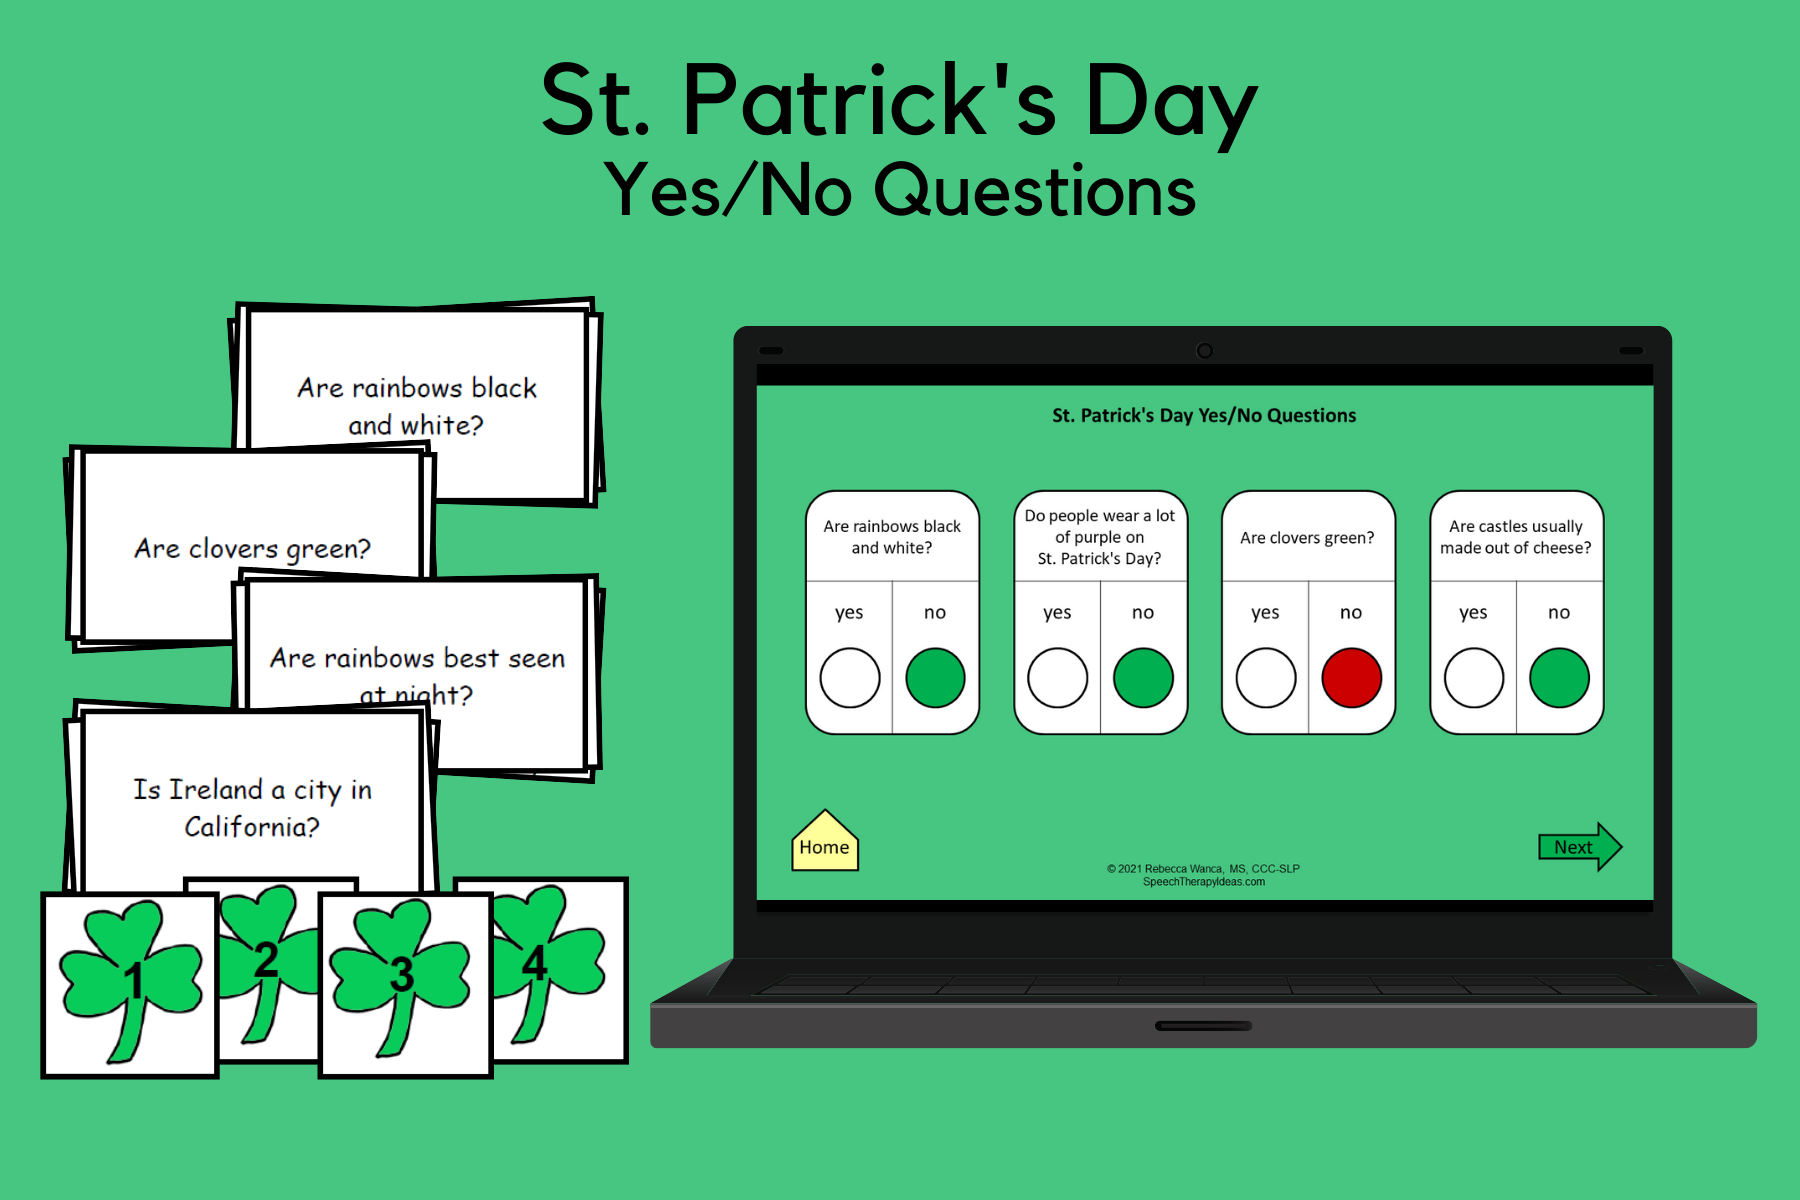 St. Patrick’s Day Game for Answering Yes/No Questions